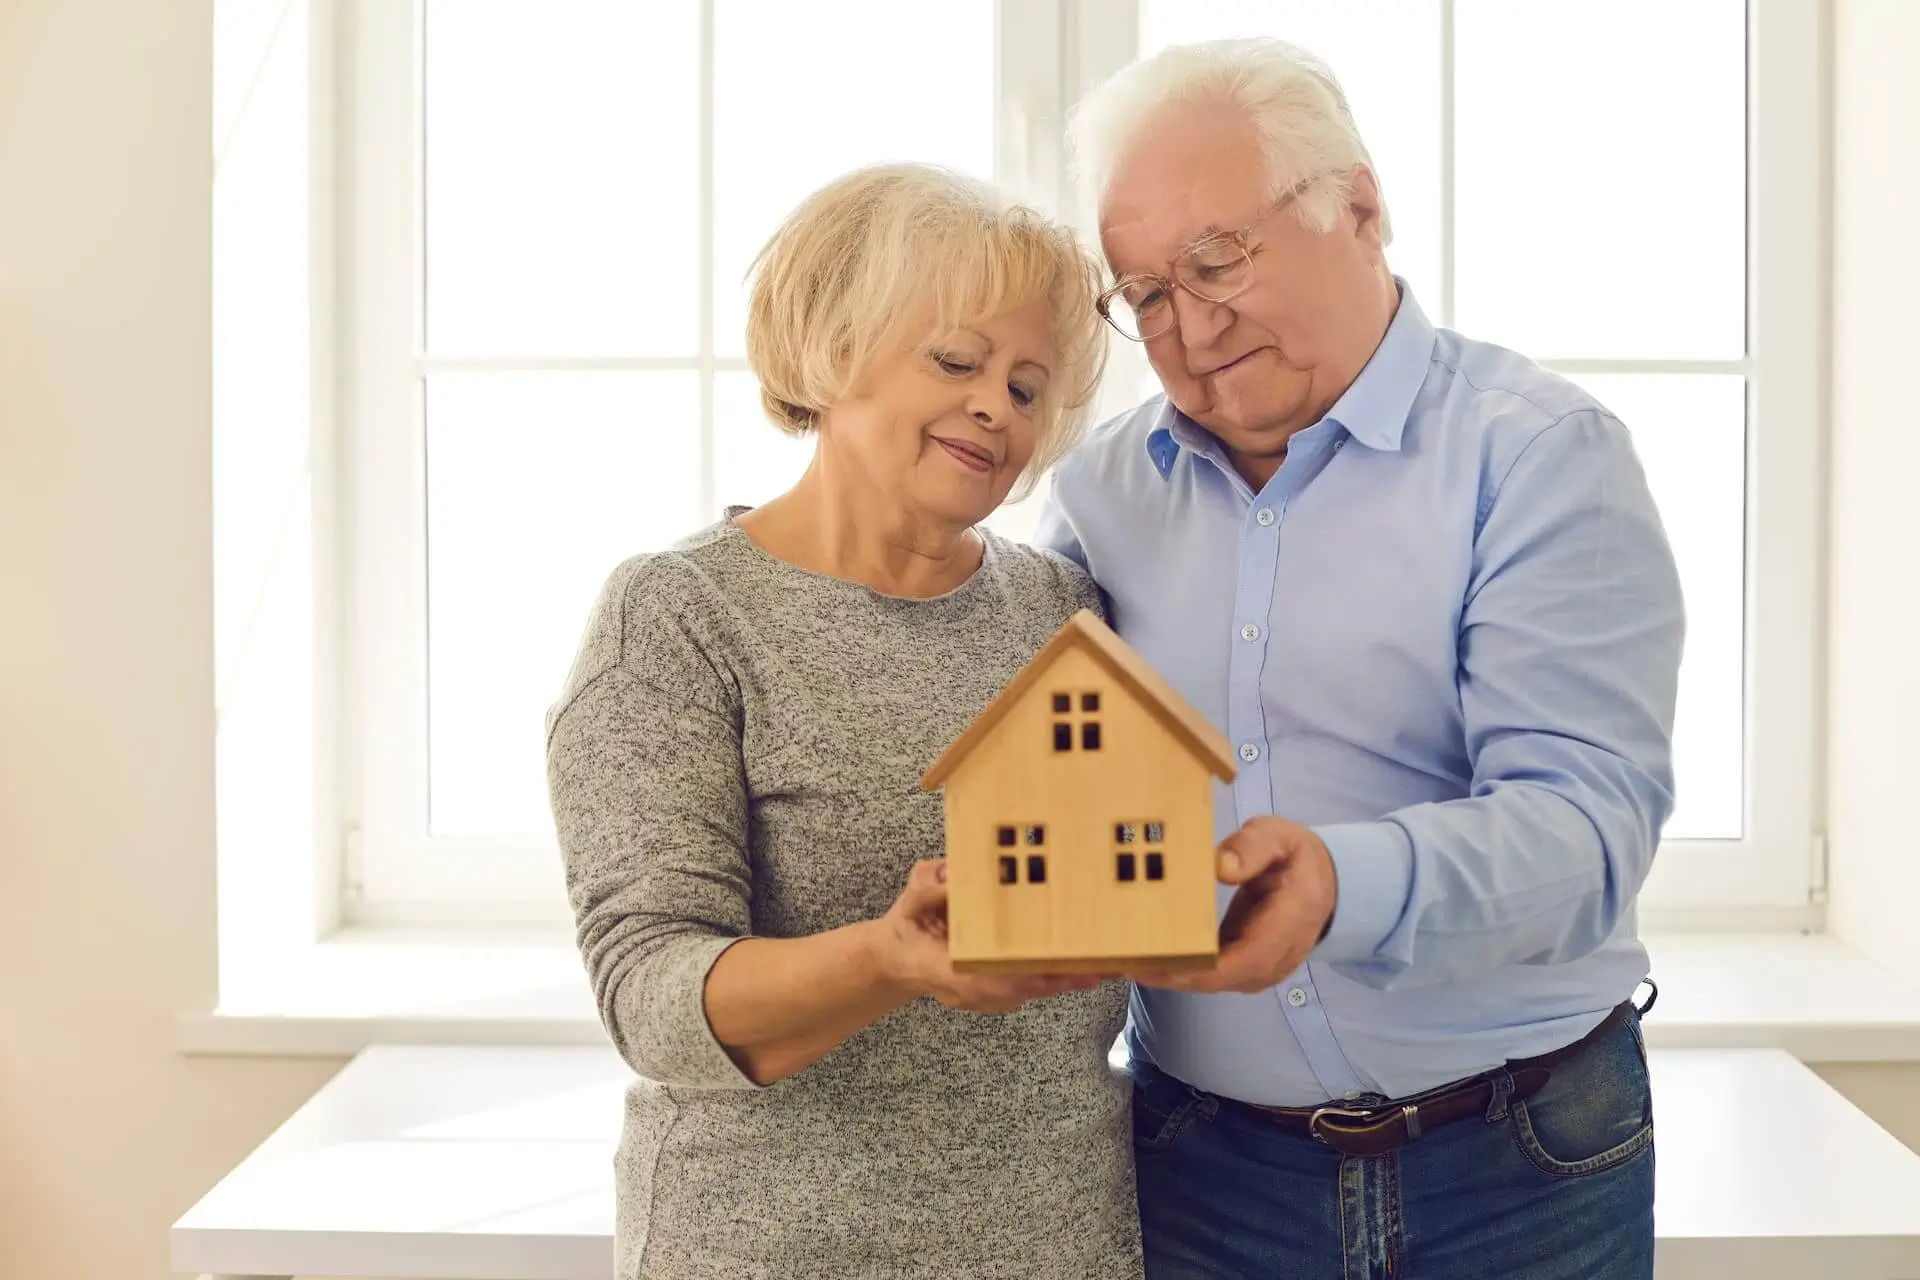 Smiling senior couple looking at a wooden model of a house being held in their hands standing by window in new home. Portrait of retirees who have purchased property insurance. New house concept.